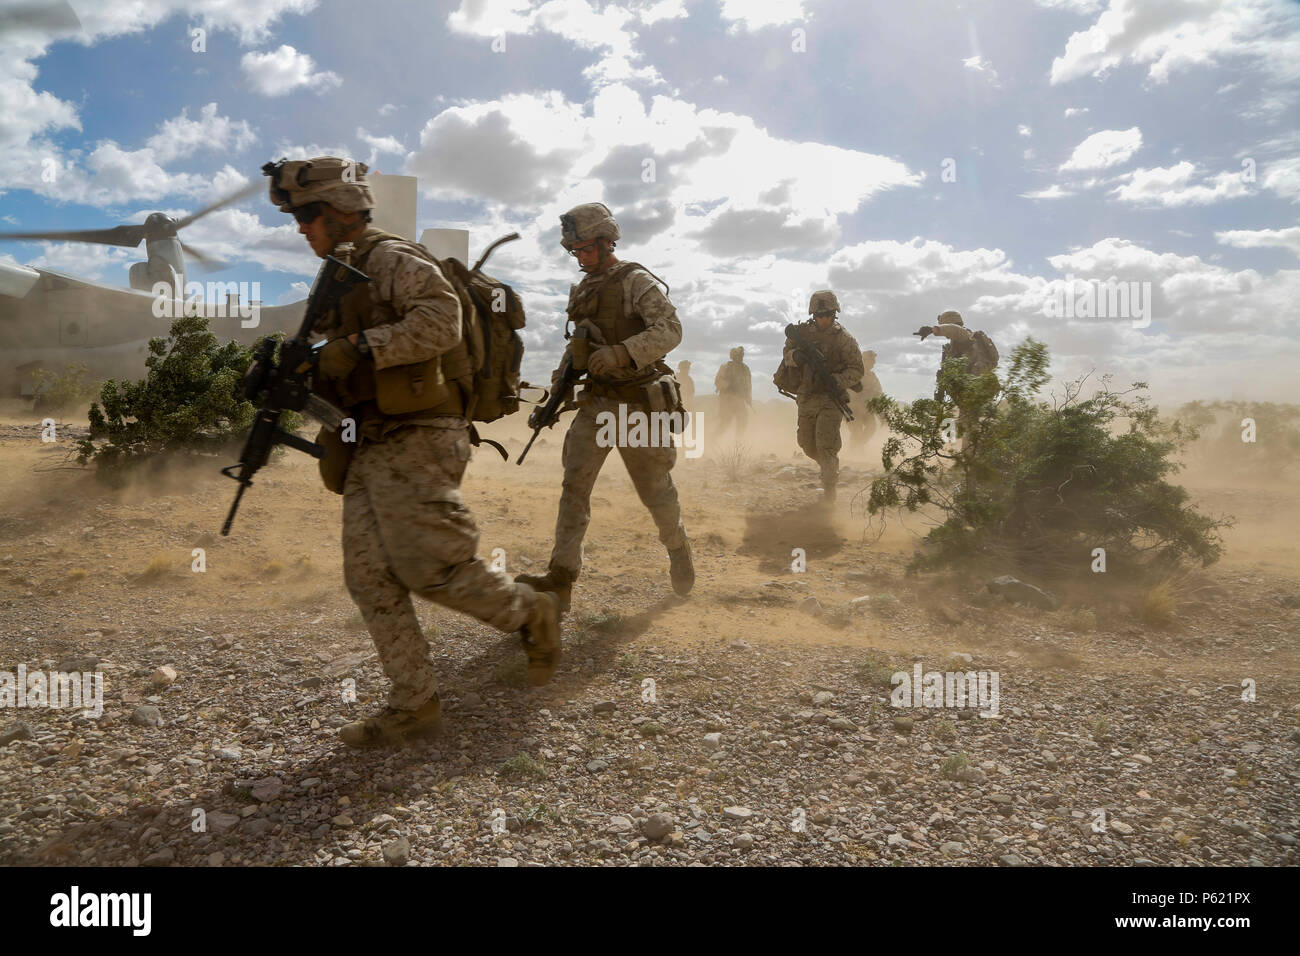 U.S. Marines with 1st Platoon, India Company, 3rd Battalion, 6th Marine Regiment, 2nd Marine Division, II Marine Expeditionary Force push out during a Marine Expeditionary Unit exercise at East Tact Airfield Ariz., April 8, 2016.  Weapons and Tactics Instructor (WTI) course 2-16 is a seven week training event hosted by Marine Aviation Weapons and Tactics Squadron One (MAWTS-1) cadre, which emphasizes operational integration of the six functions of the Marine Corps aviation in support of a Marine Air Ground Task Force. MAWTS-1 provides standardized advanced tactical training and certification o Stock Photo